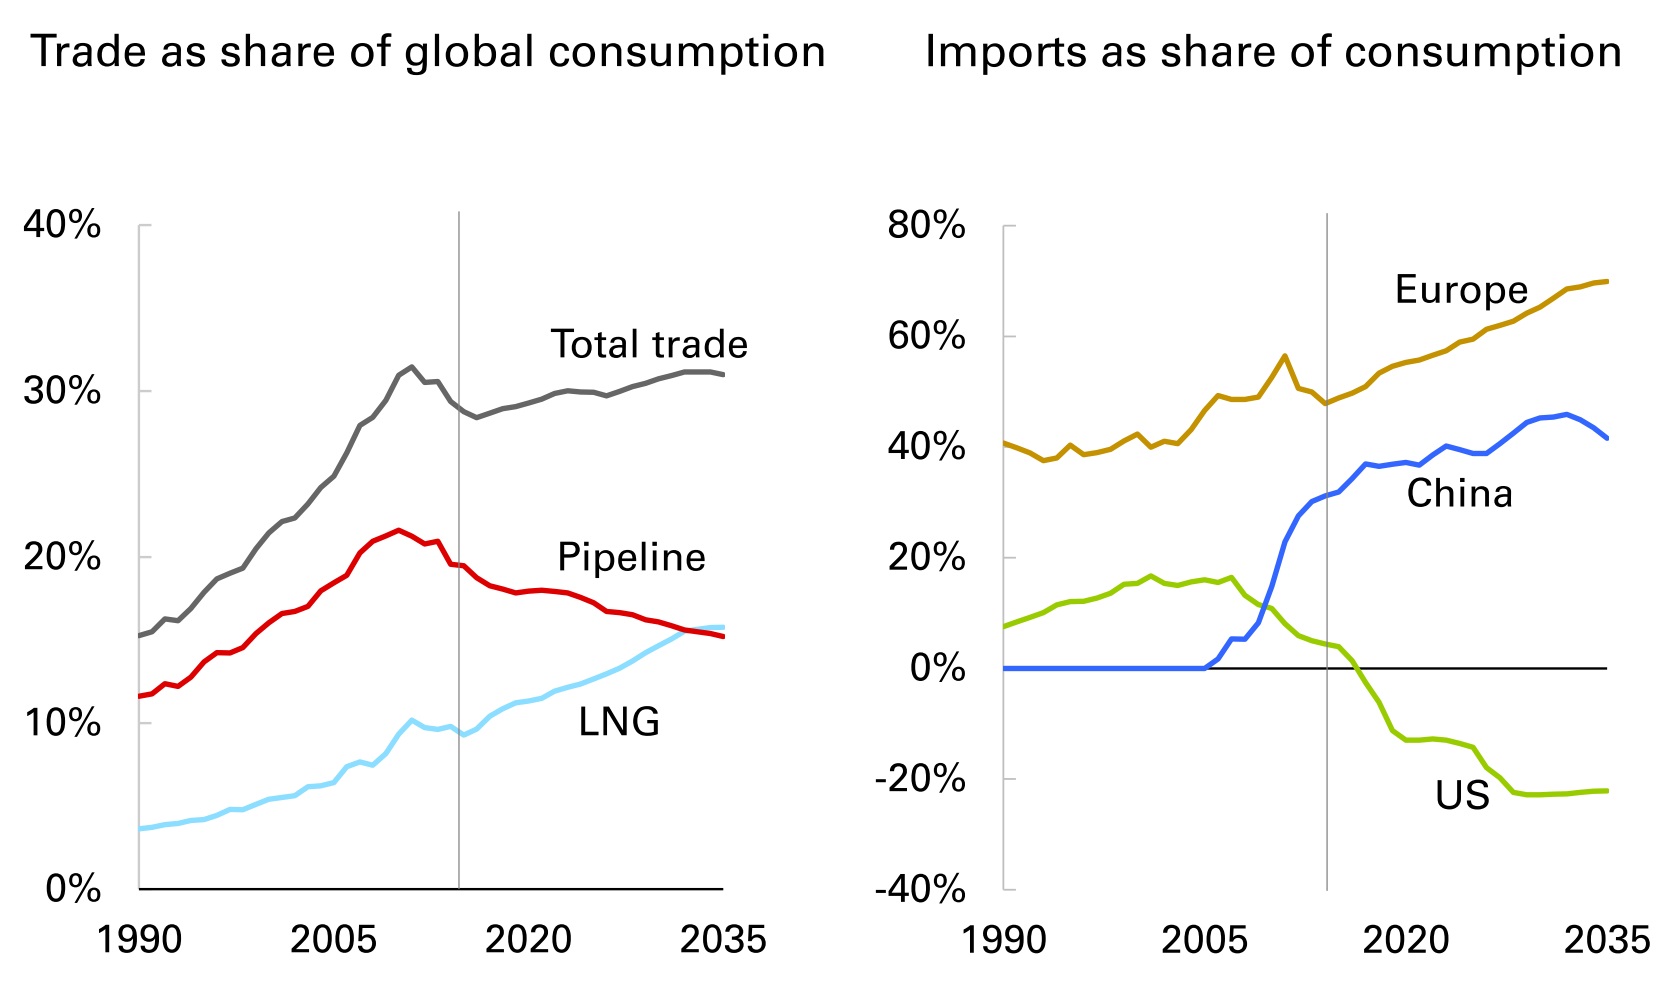 trade as share of global consumption and imports as share of consumption.